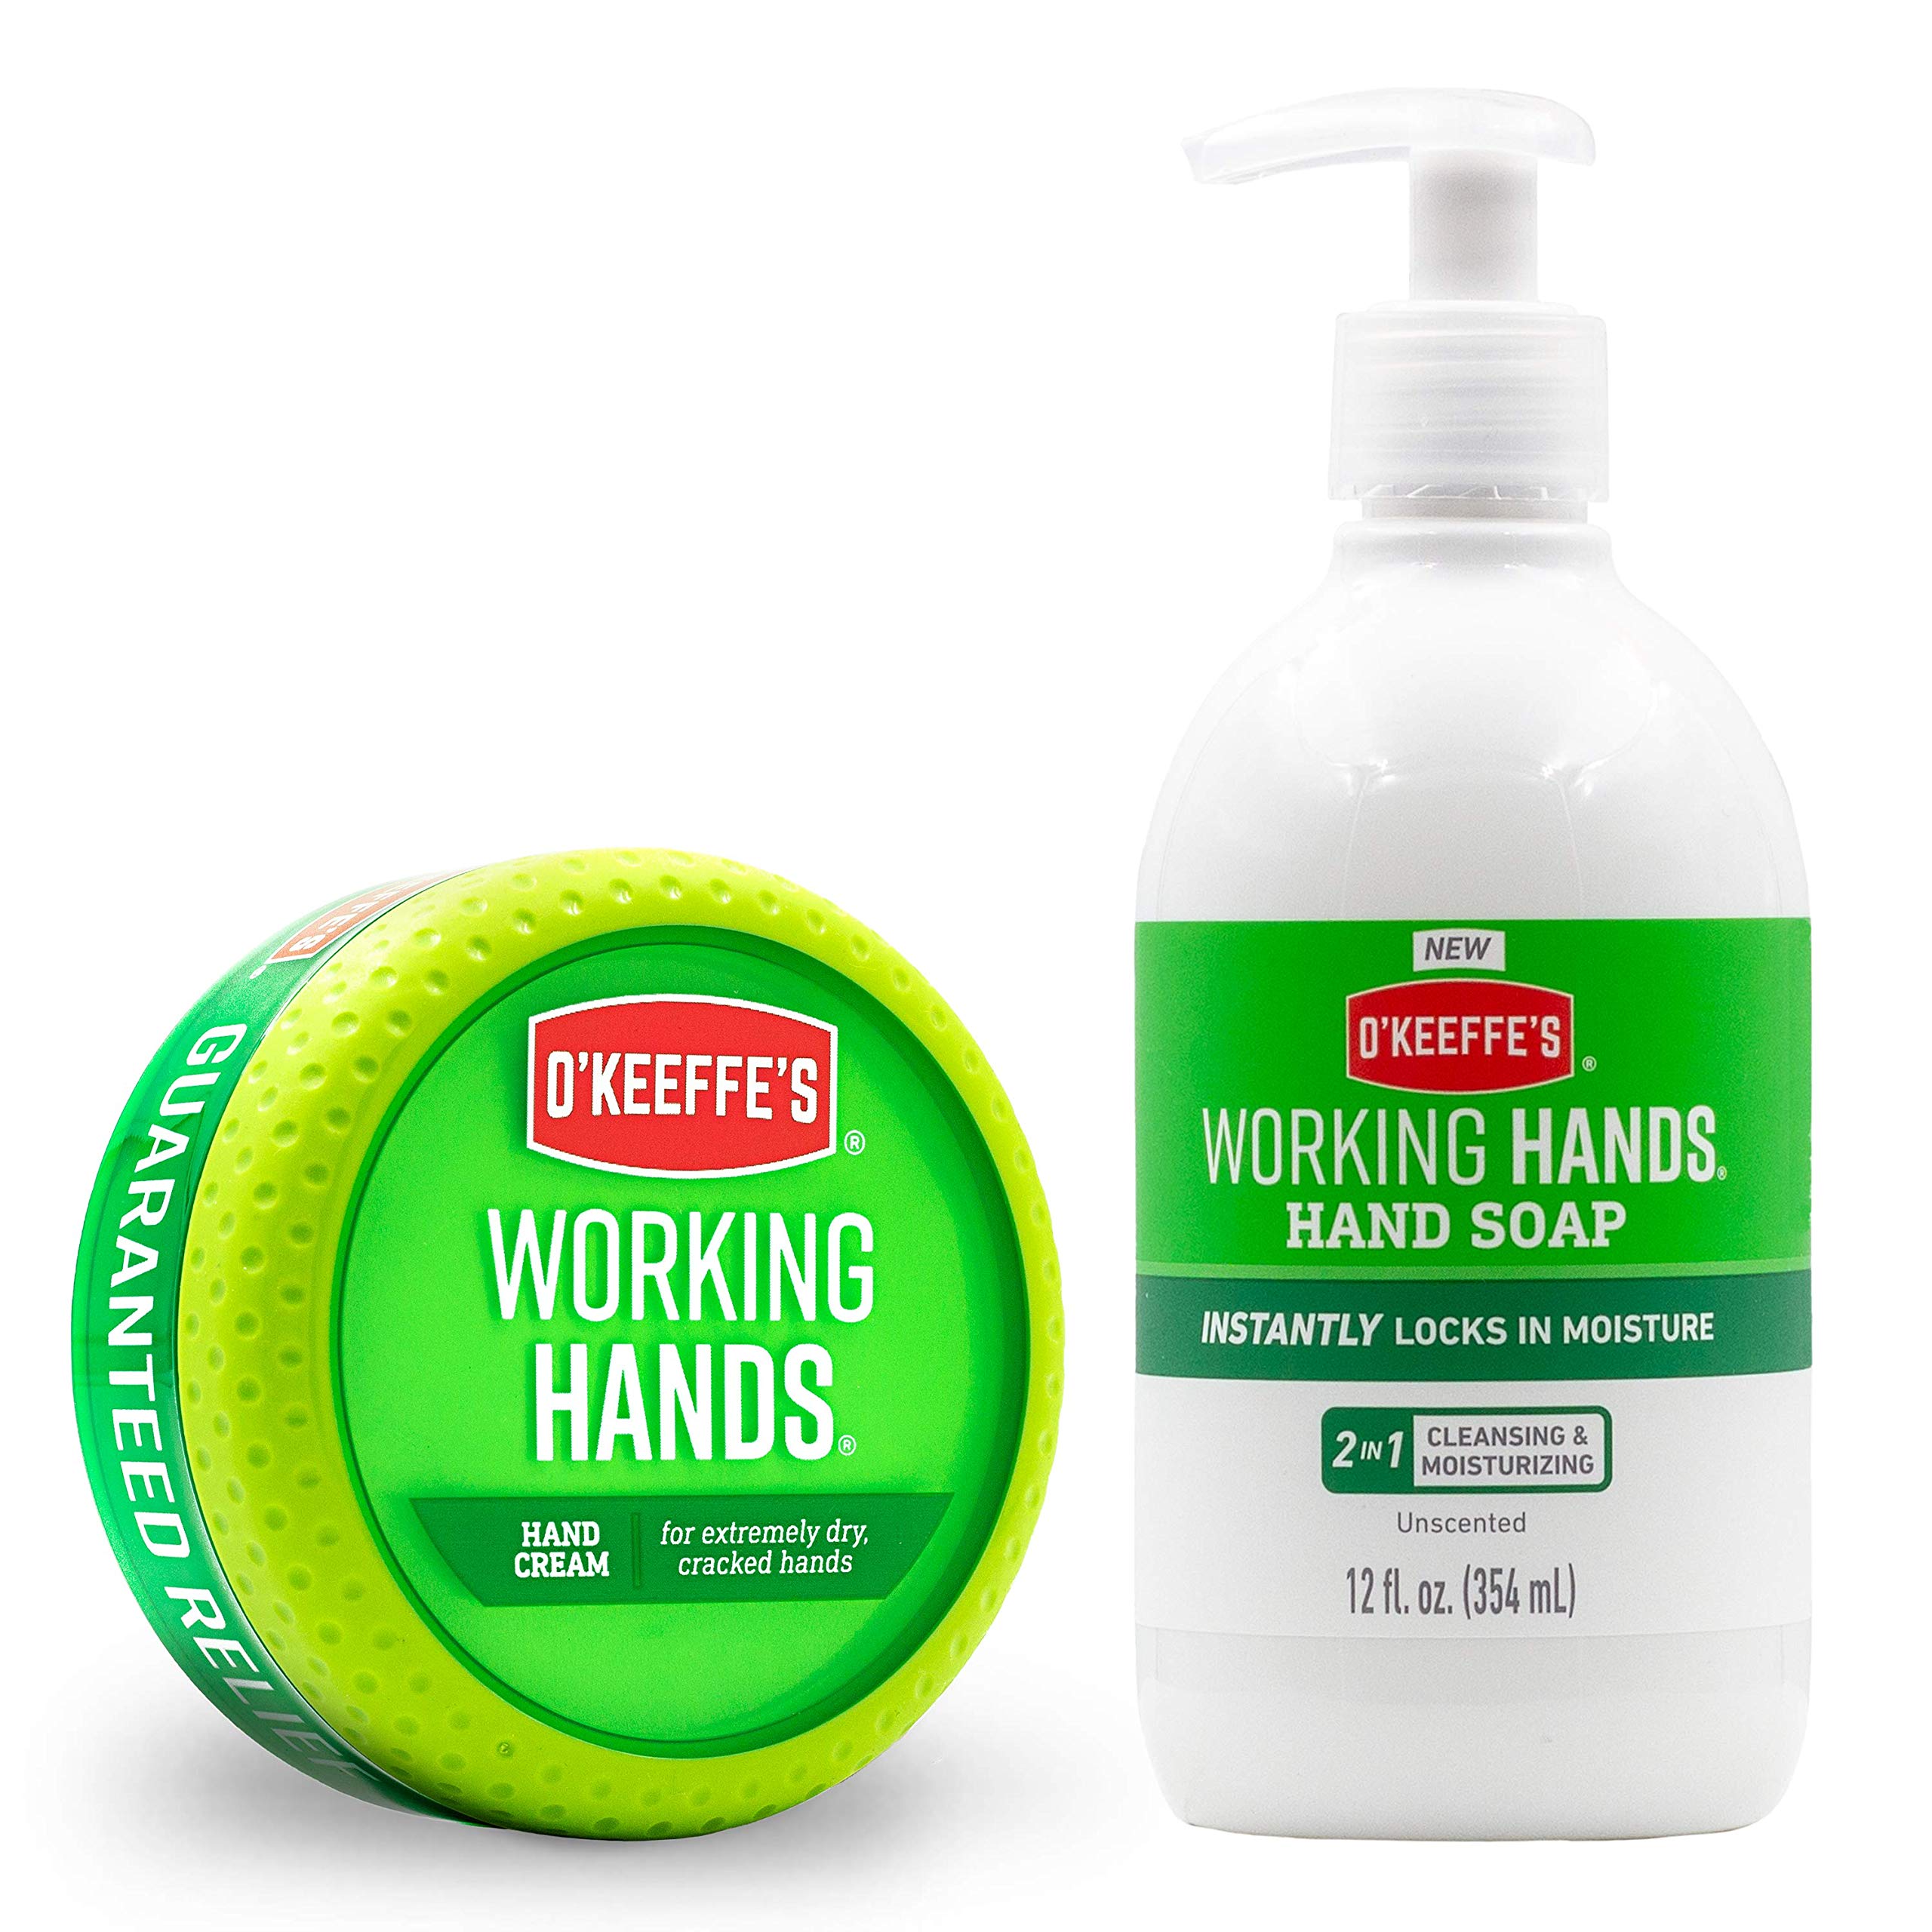 O'Keeffe's Working Hands No Scent Hand Soap 12 oz  Moisturizing hand soap,  Liquid hand soap, Working hands